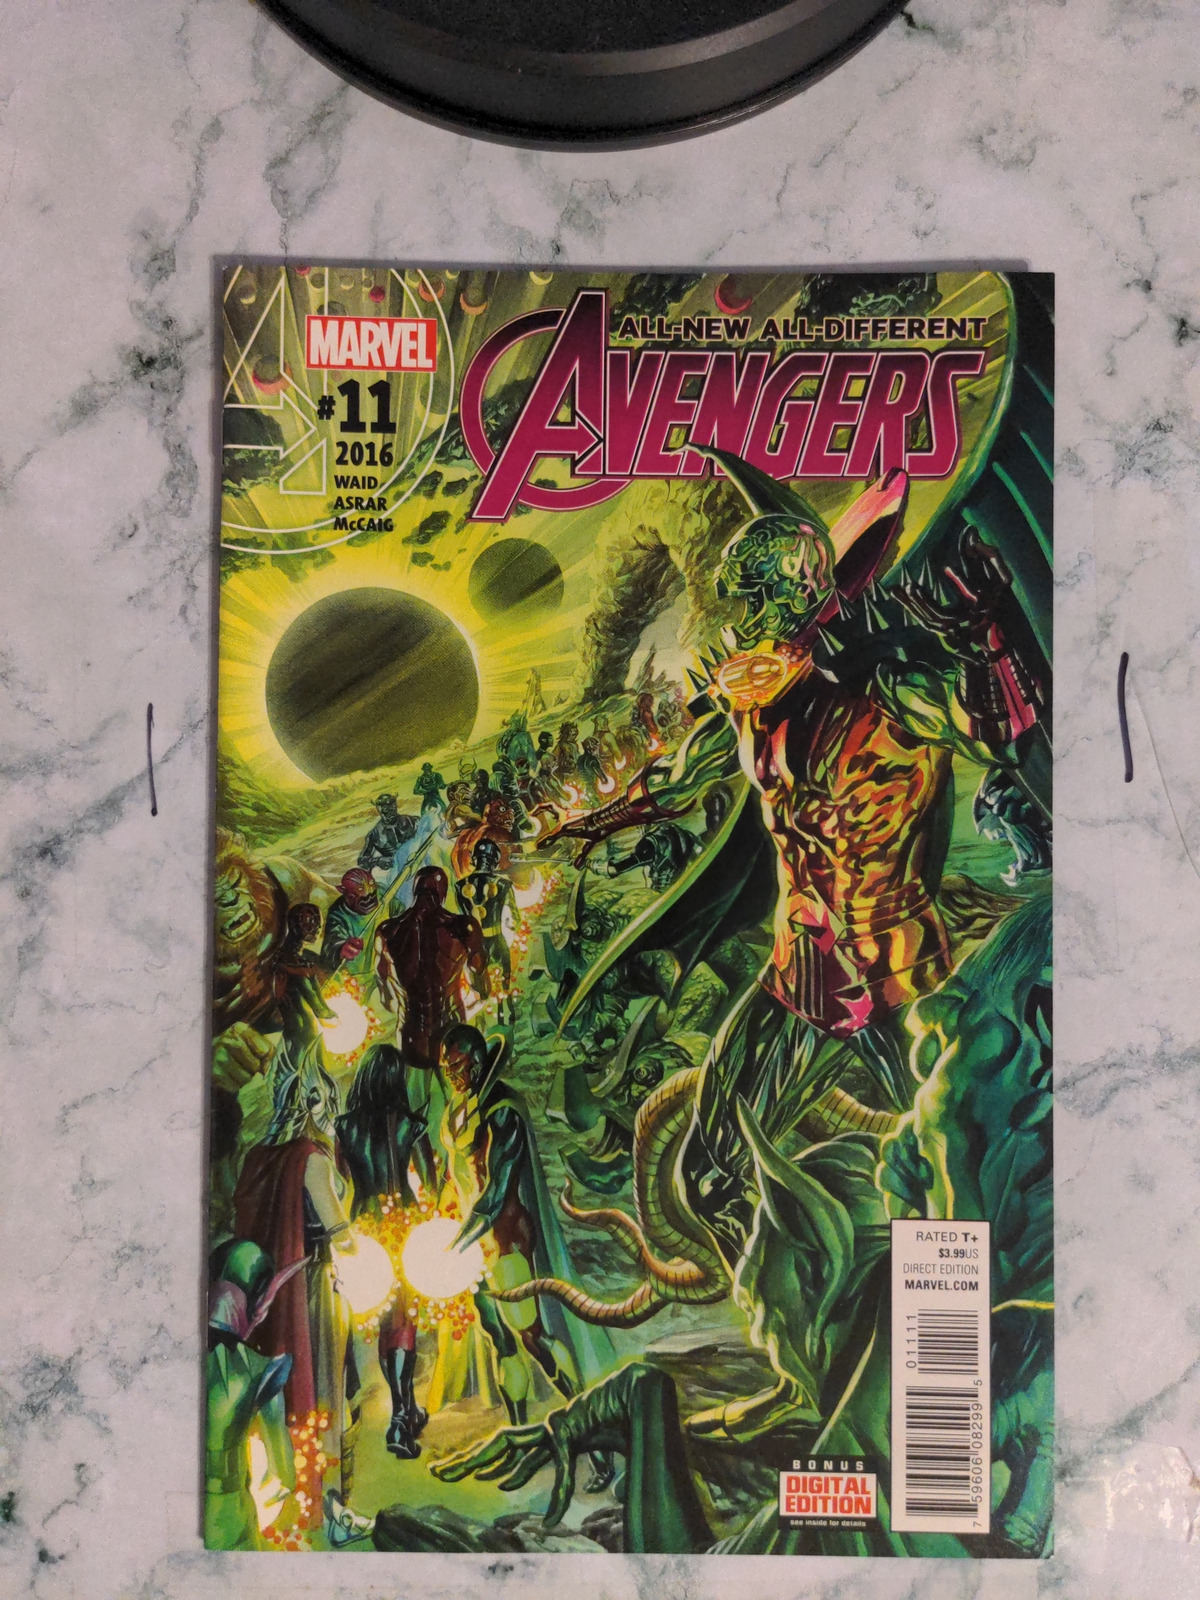 ALL-NEW, ALL-DIFFERENT AVENGERS #11 8.0-8.5 MARVEL COMIC BOOK B-89